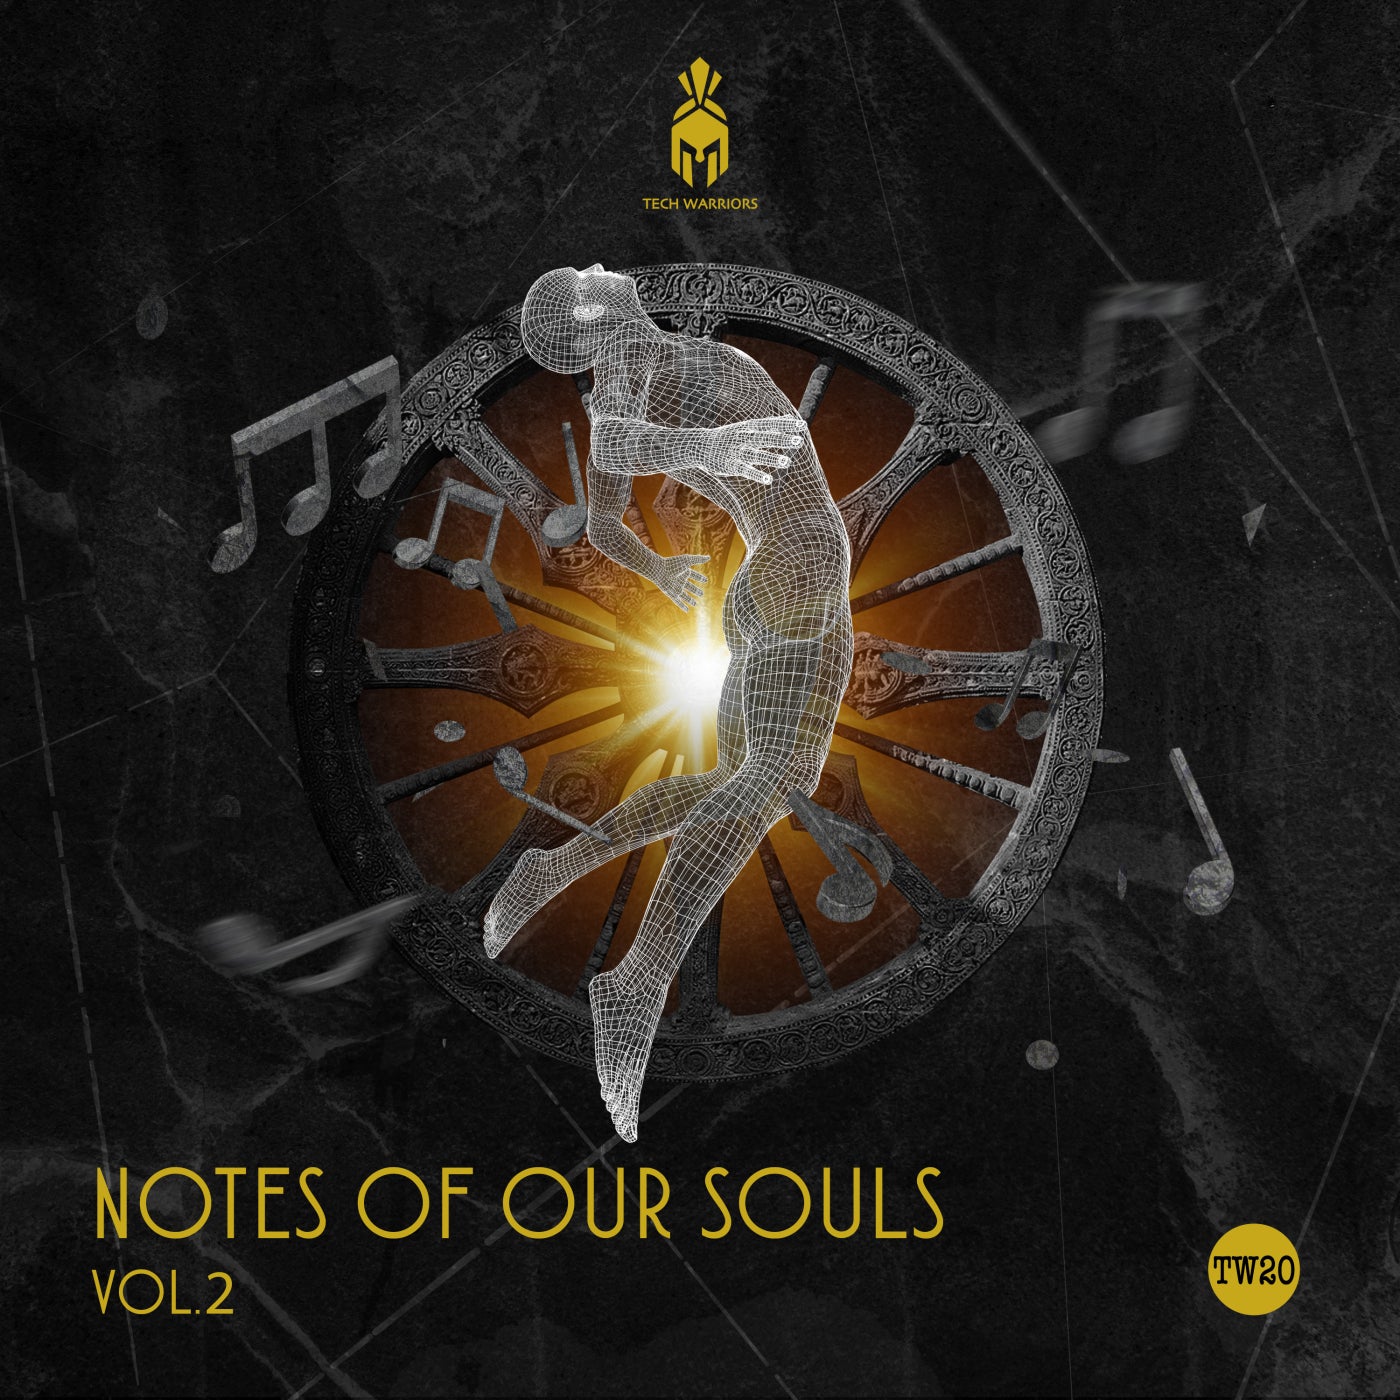 Notes of Our Souls